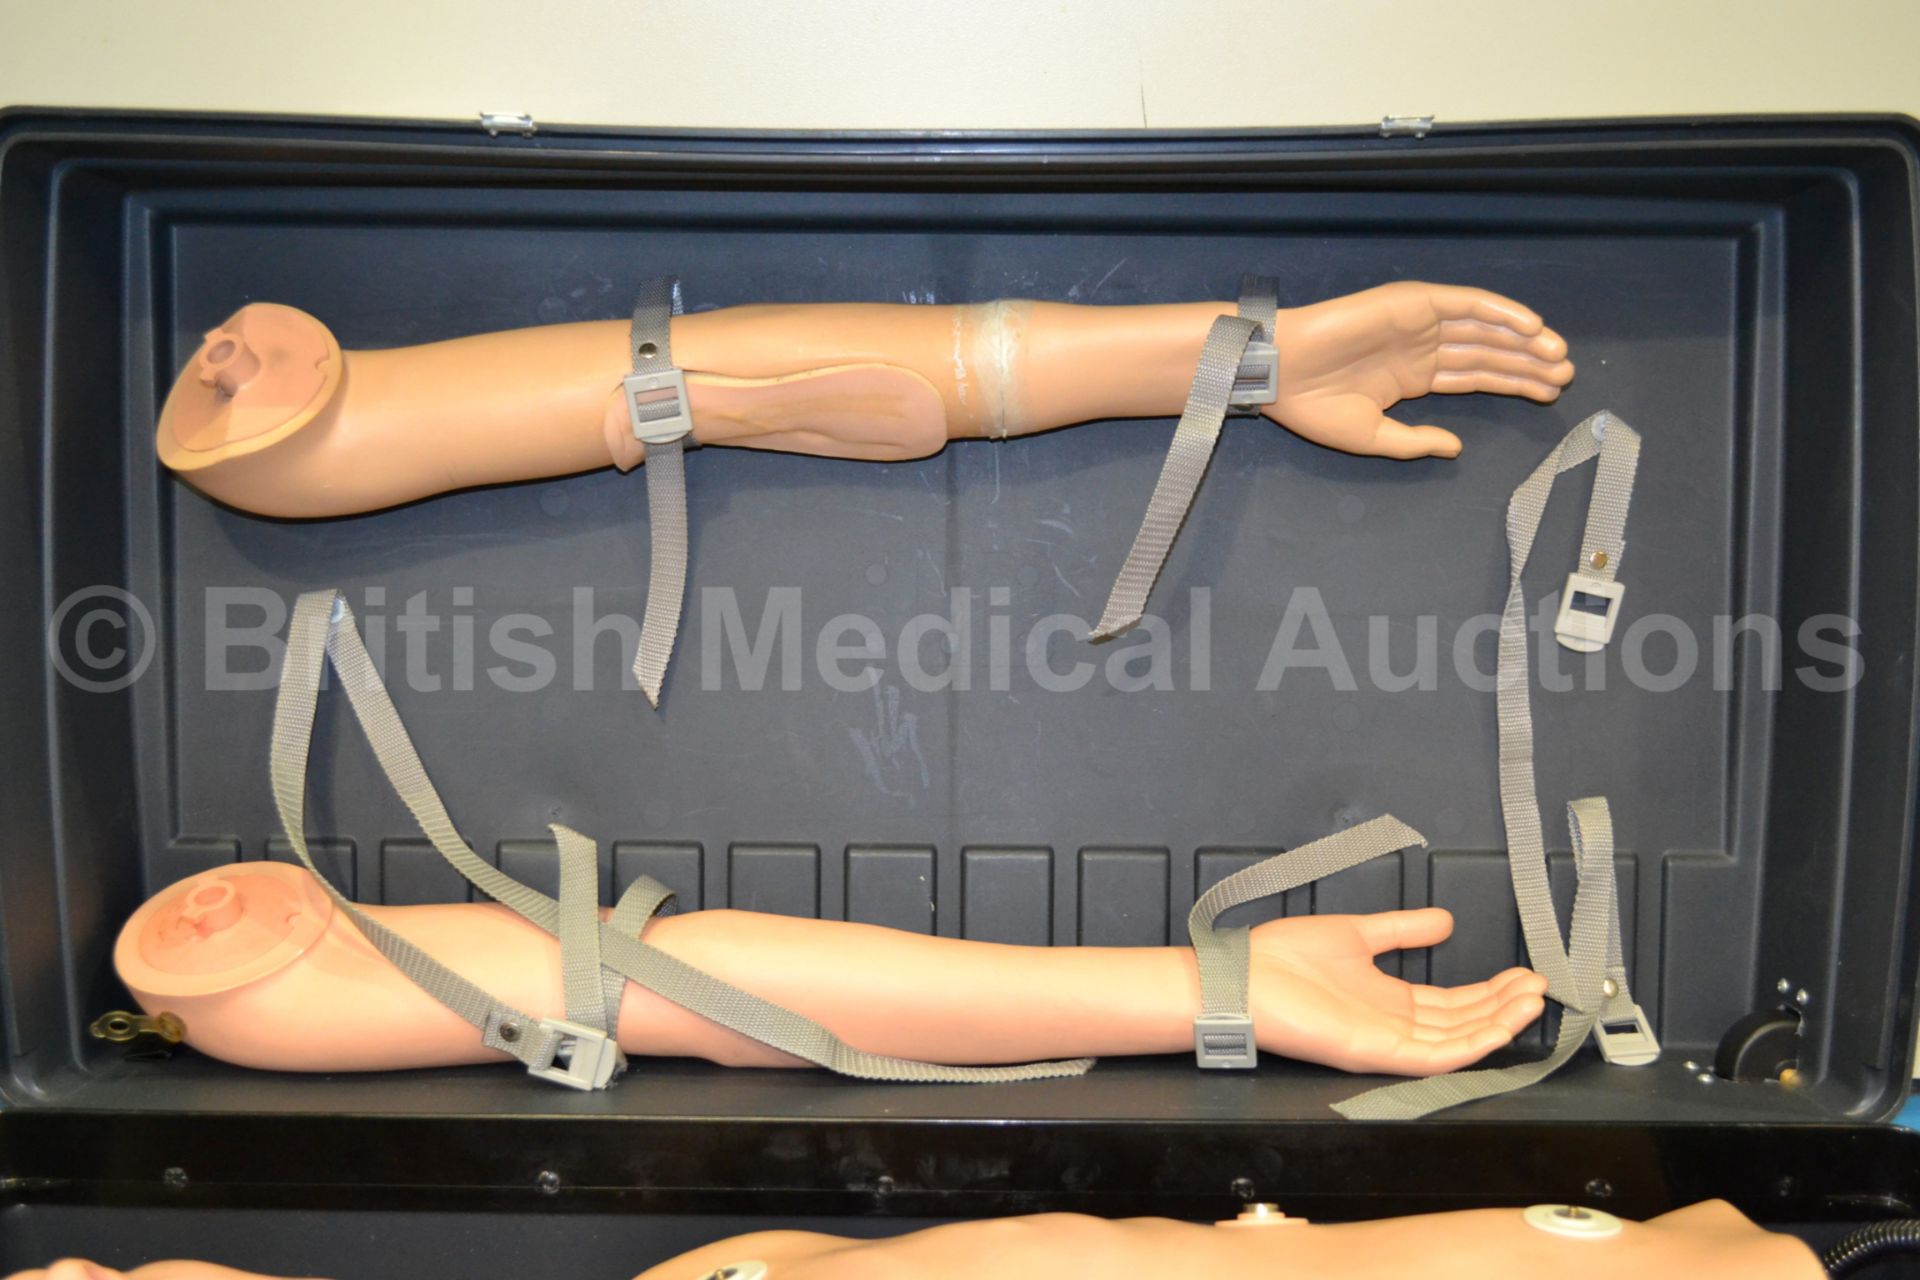 Laerdal ALS Skill Trainer (Good Condition) - Image 3 of 5